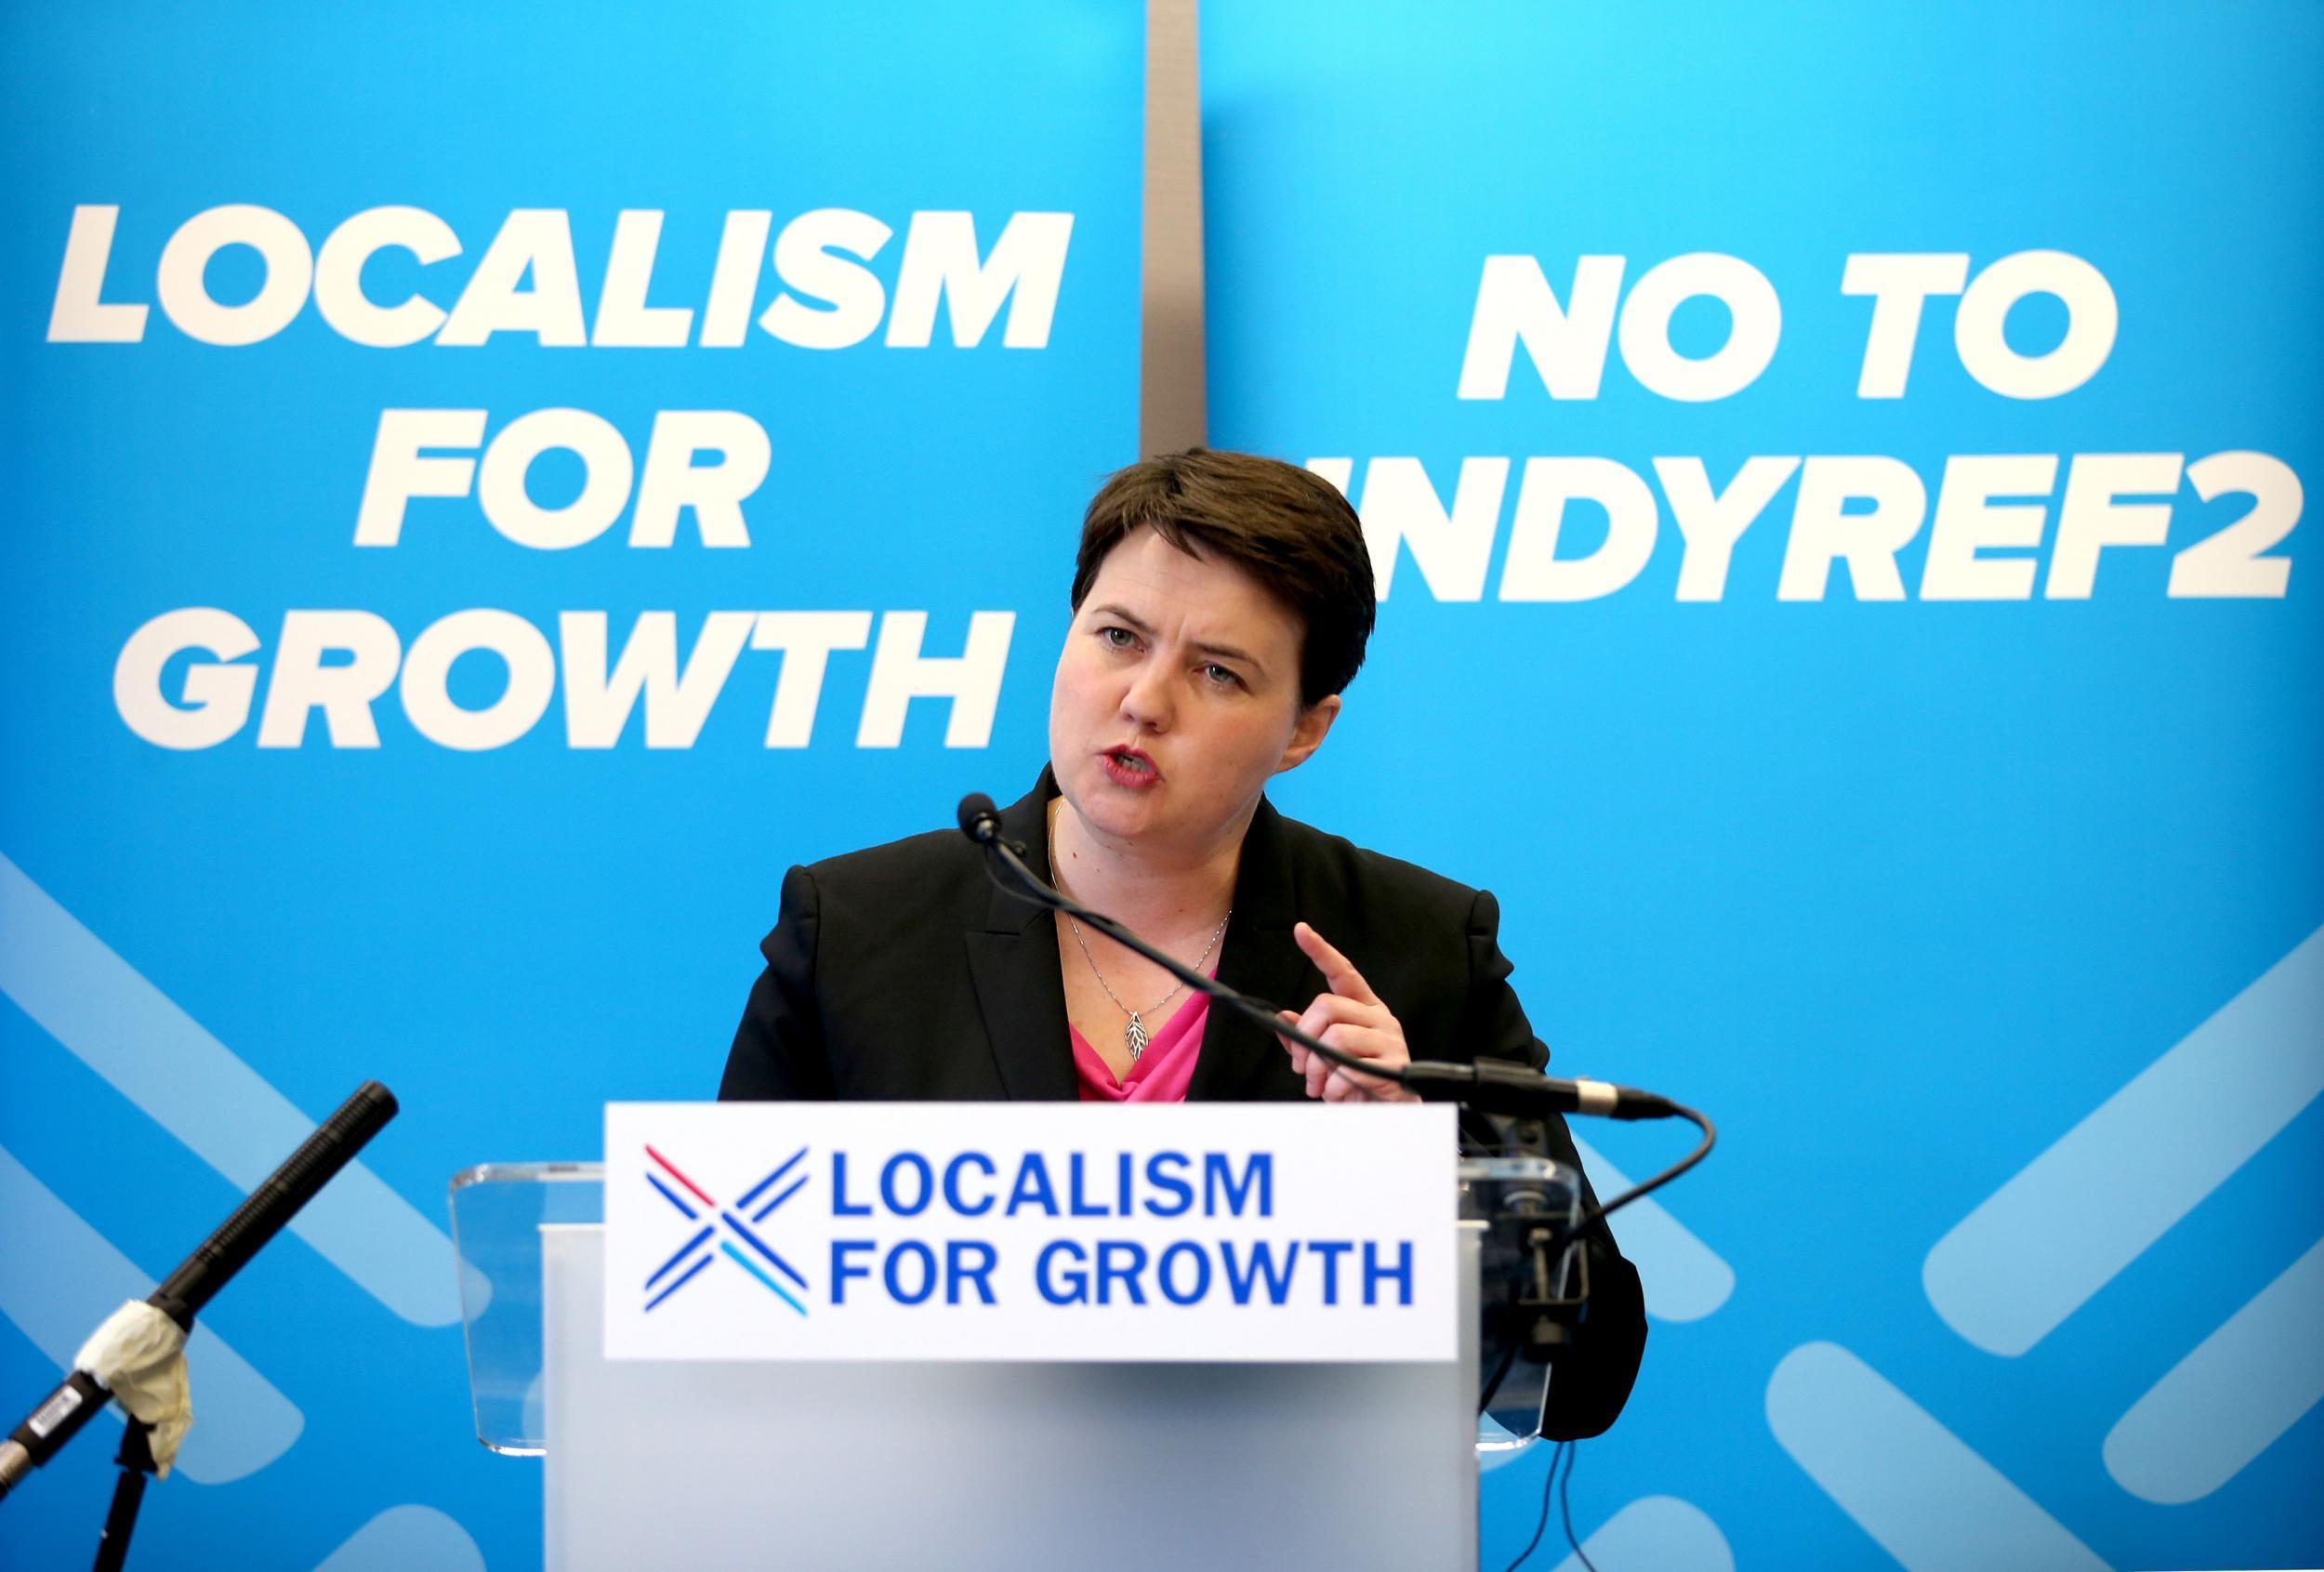 Ruth Davidson delivers a speech ahead of the Scottish local elections